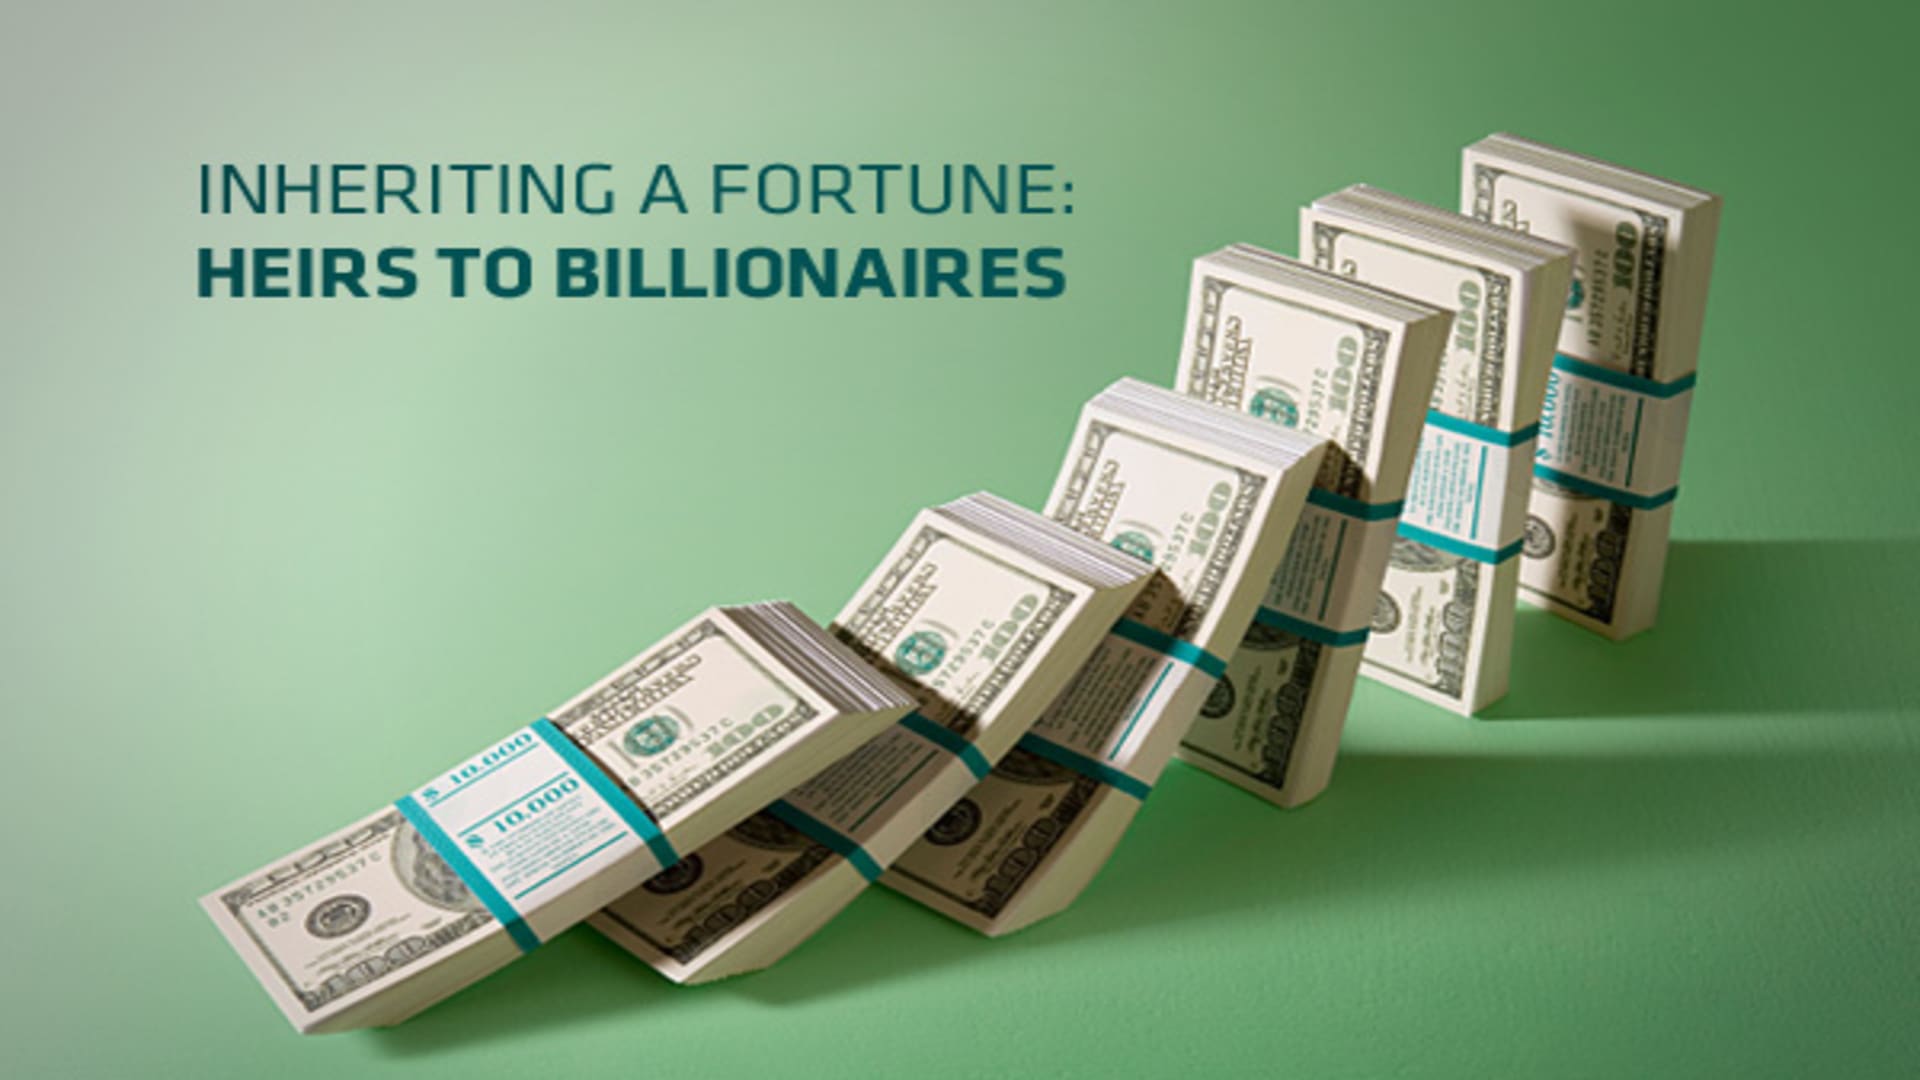 Inheriting a Fortune: Heirs to Billionaires